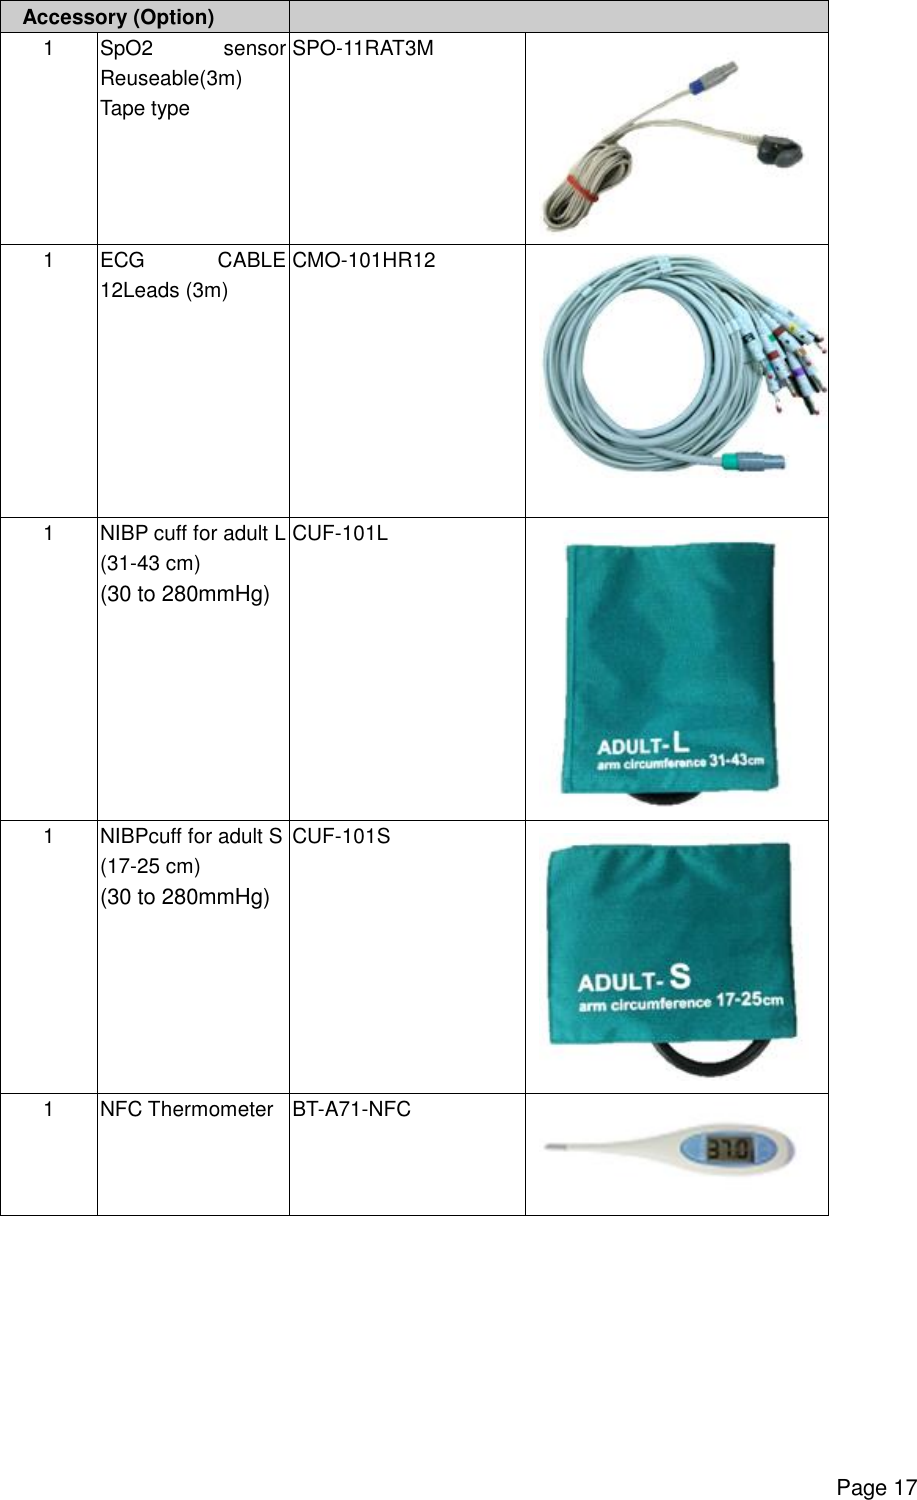      Page 17 Accessory (Option)   1 SpO2 sensor Reuseable(3m) Tape type SPO-11RAT3M  1 ECG CABLE 12Leads (3m) CMO-101HR12  1  NIBP cuff for adult L (31-43 cm) (30 to 280mmHg) CUF-101L  1  NIBPcuff for adult S (17-25 cm) (30 to 280mmHg) CUF-101S  1  NFC Thermometer BT-A71-NFC   